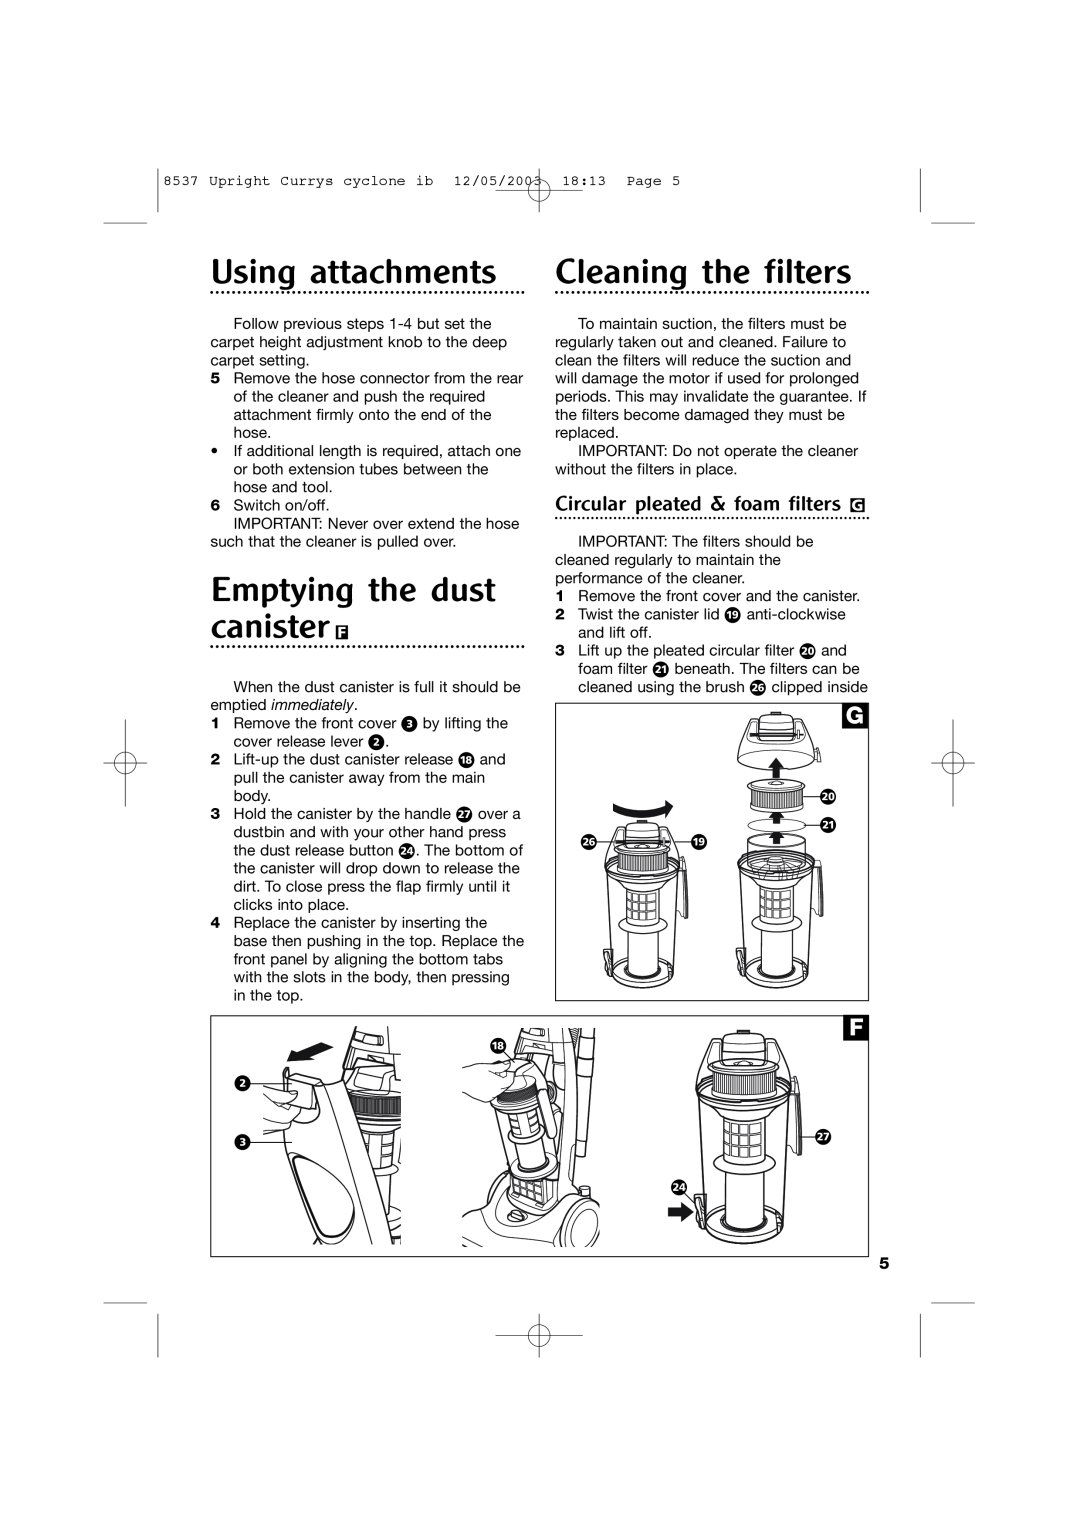 Morphy Richards 73313 manual Using attachments, Cleaning the filters, Emptying the dust canister F 